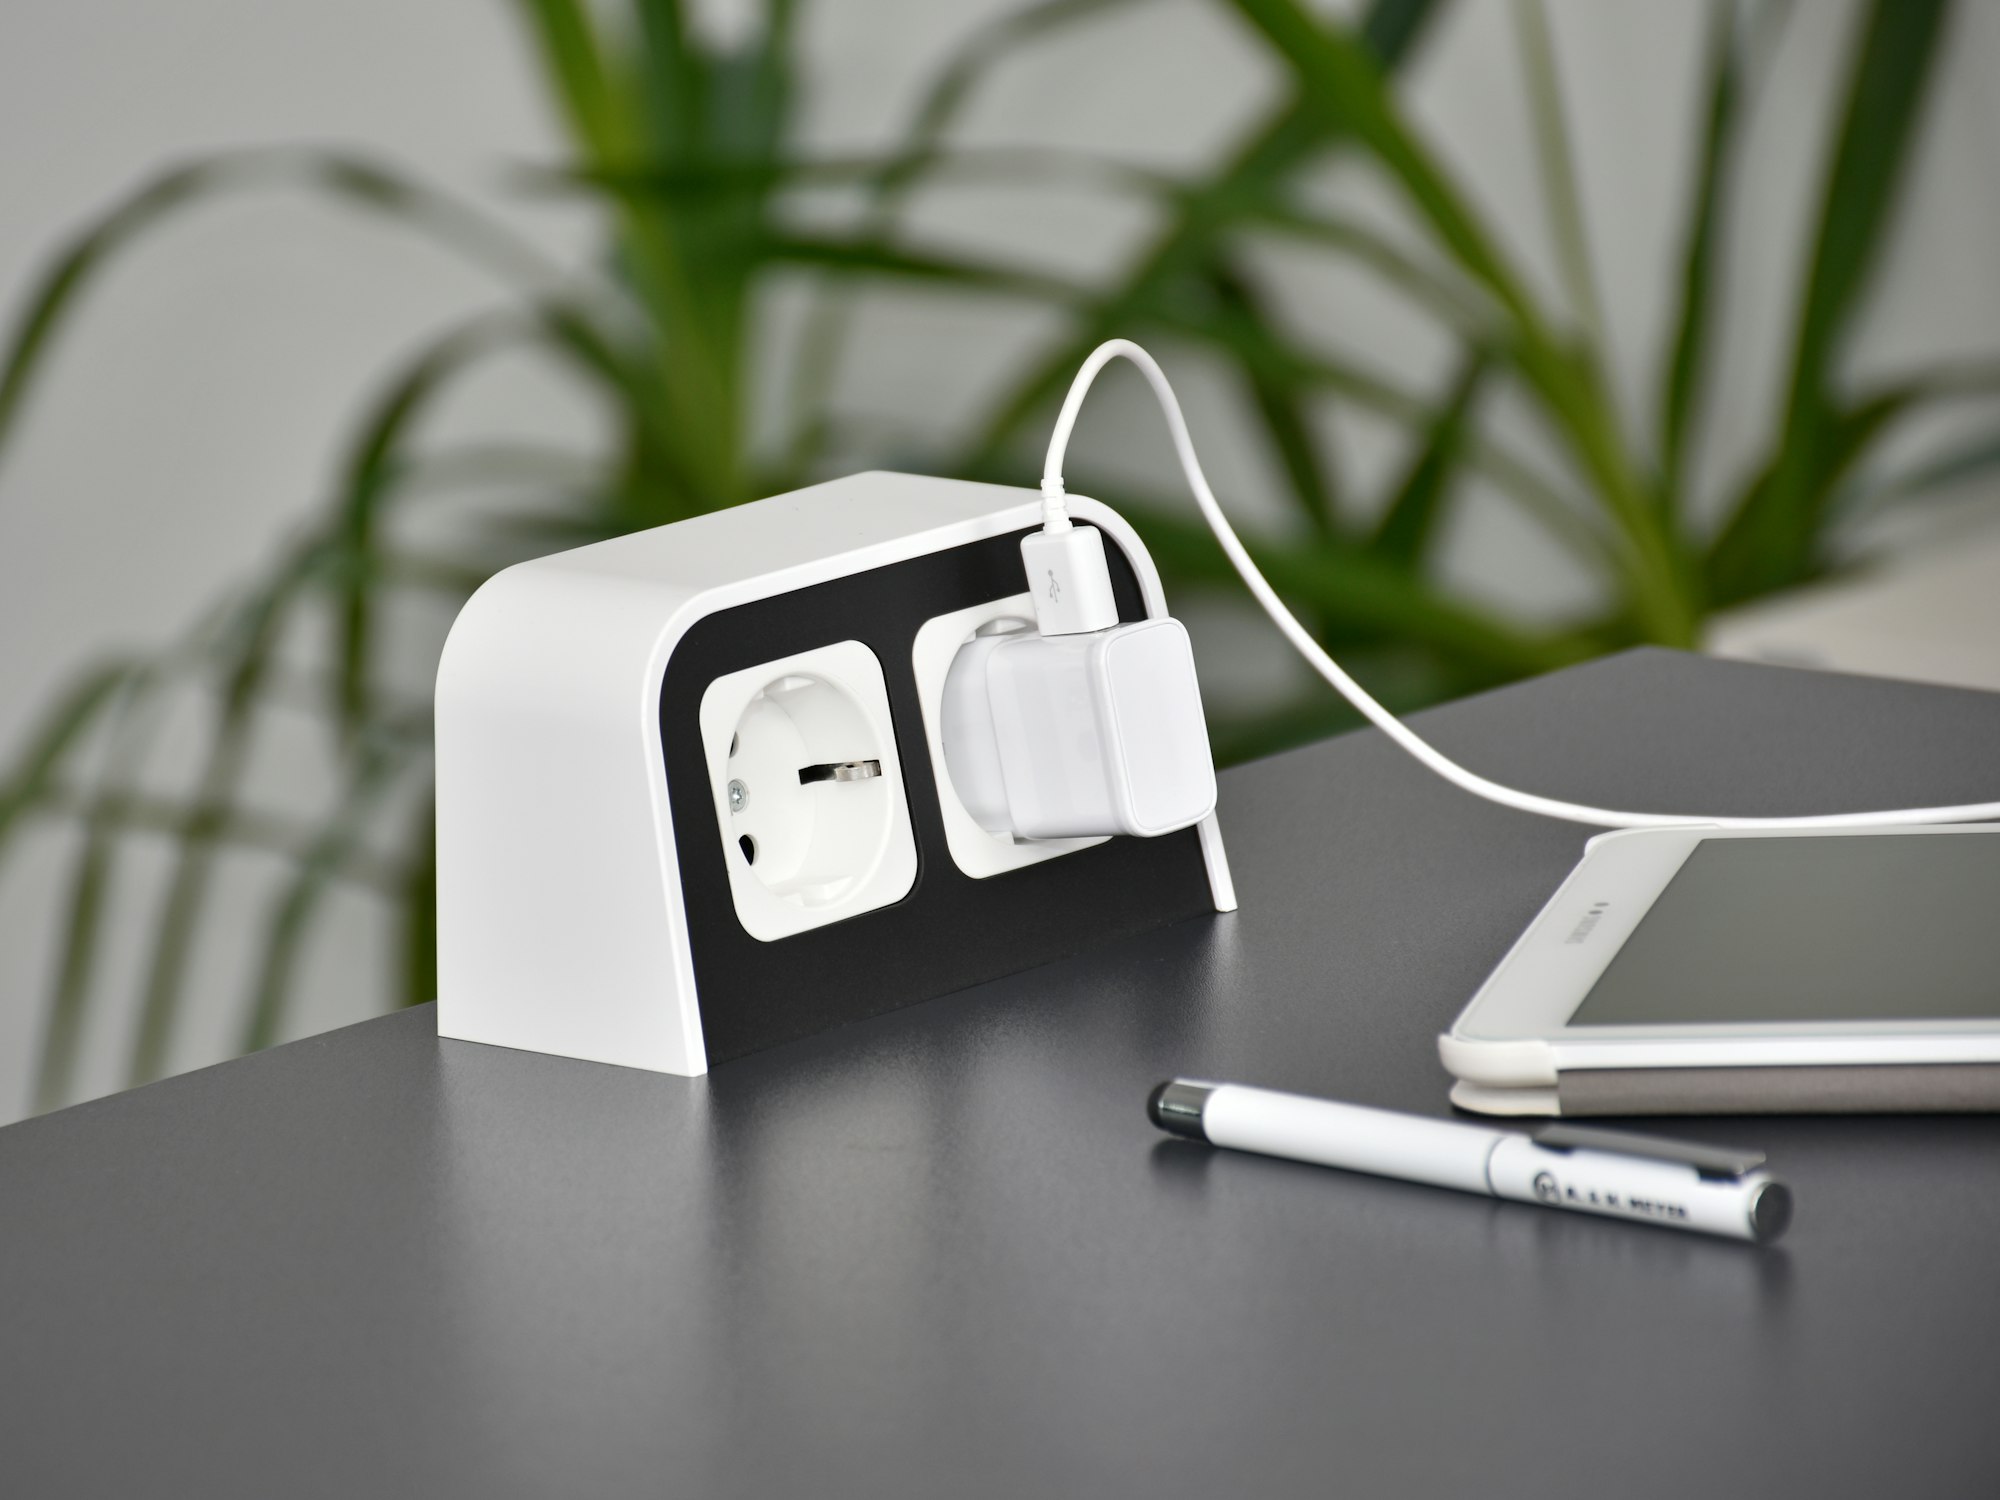 Desktop socket white with tablet and green plant